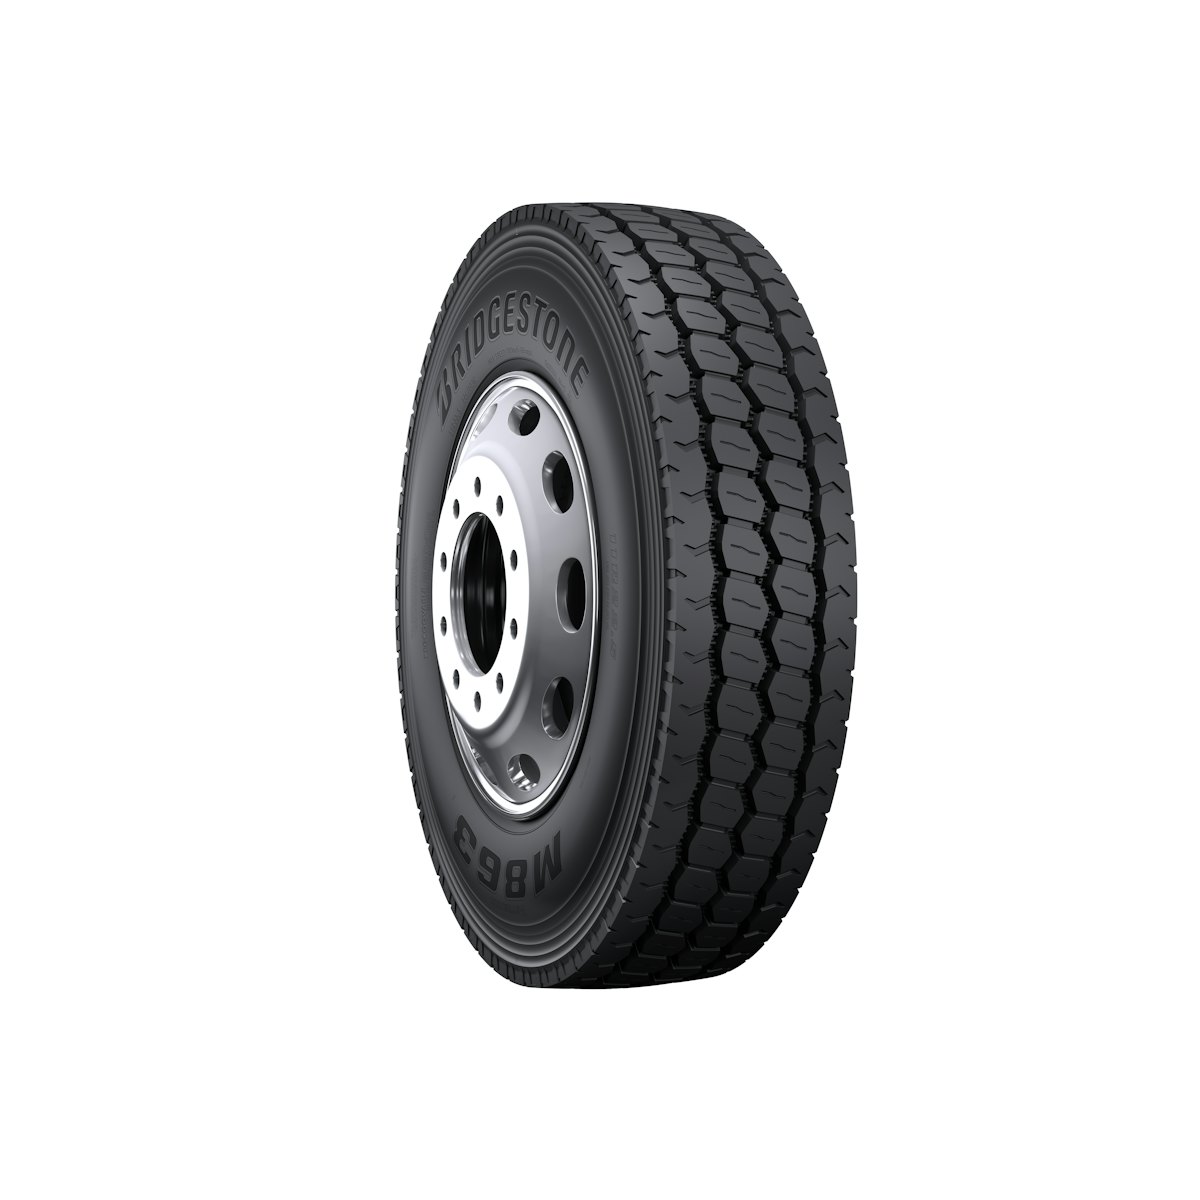 New all-position tire from Bridgestone | Commercial Carrier Journal